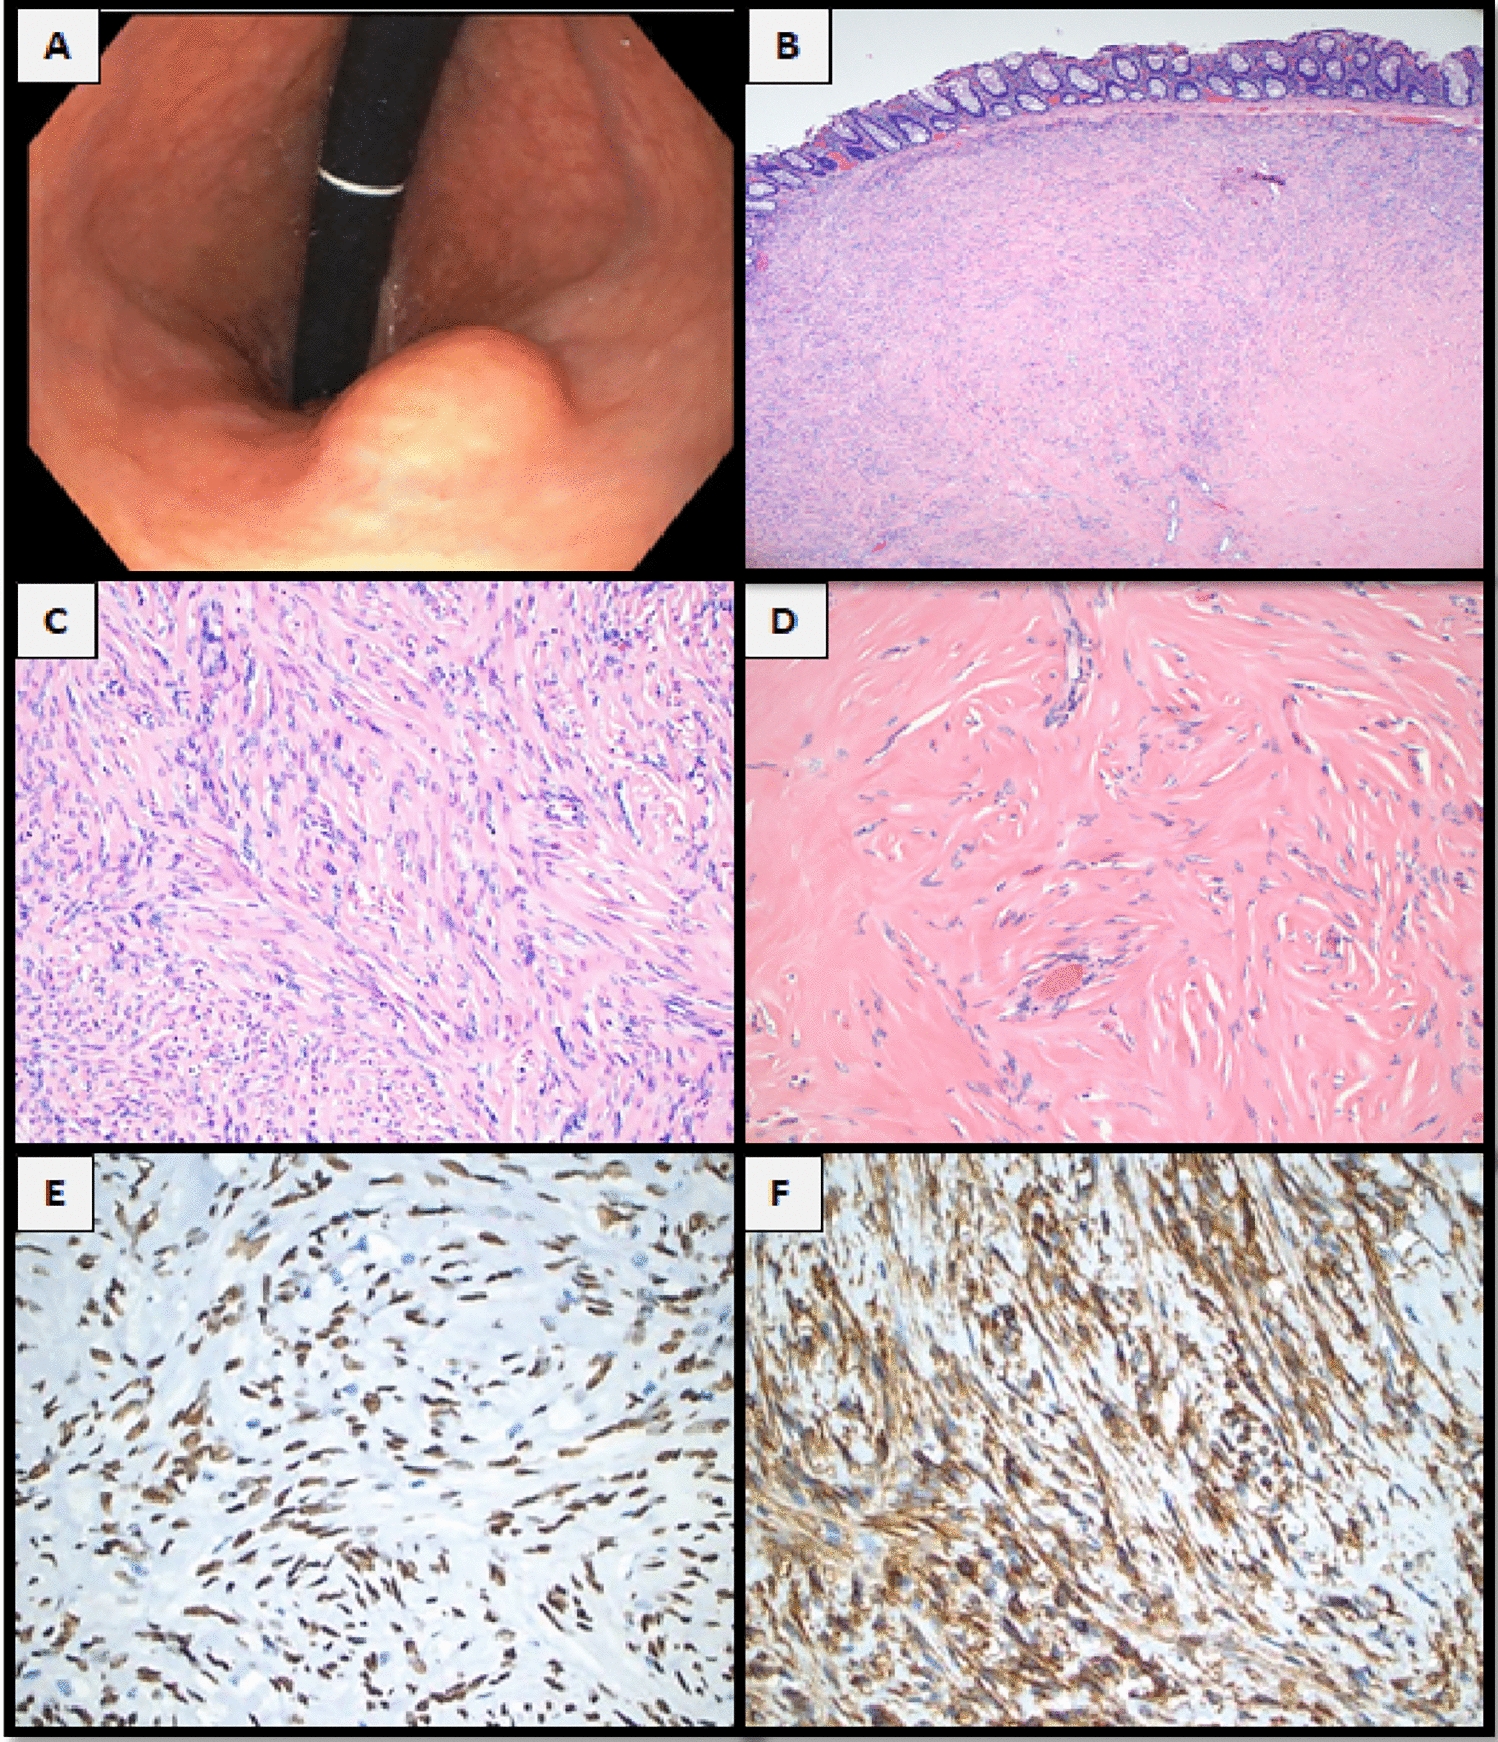 Solitary fibrous tumor occurring in the colon as submucosal mesenchymal lesion: report of two cases and review of the literature